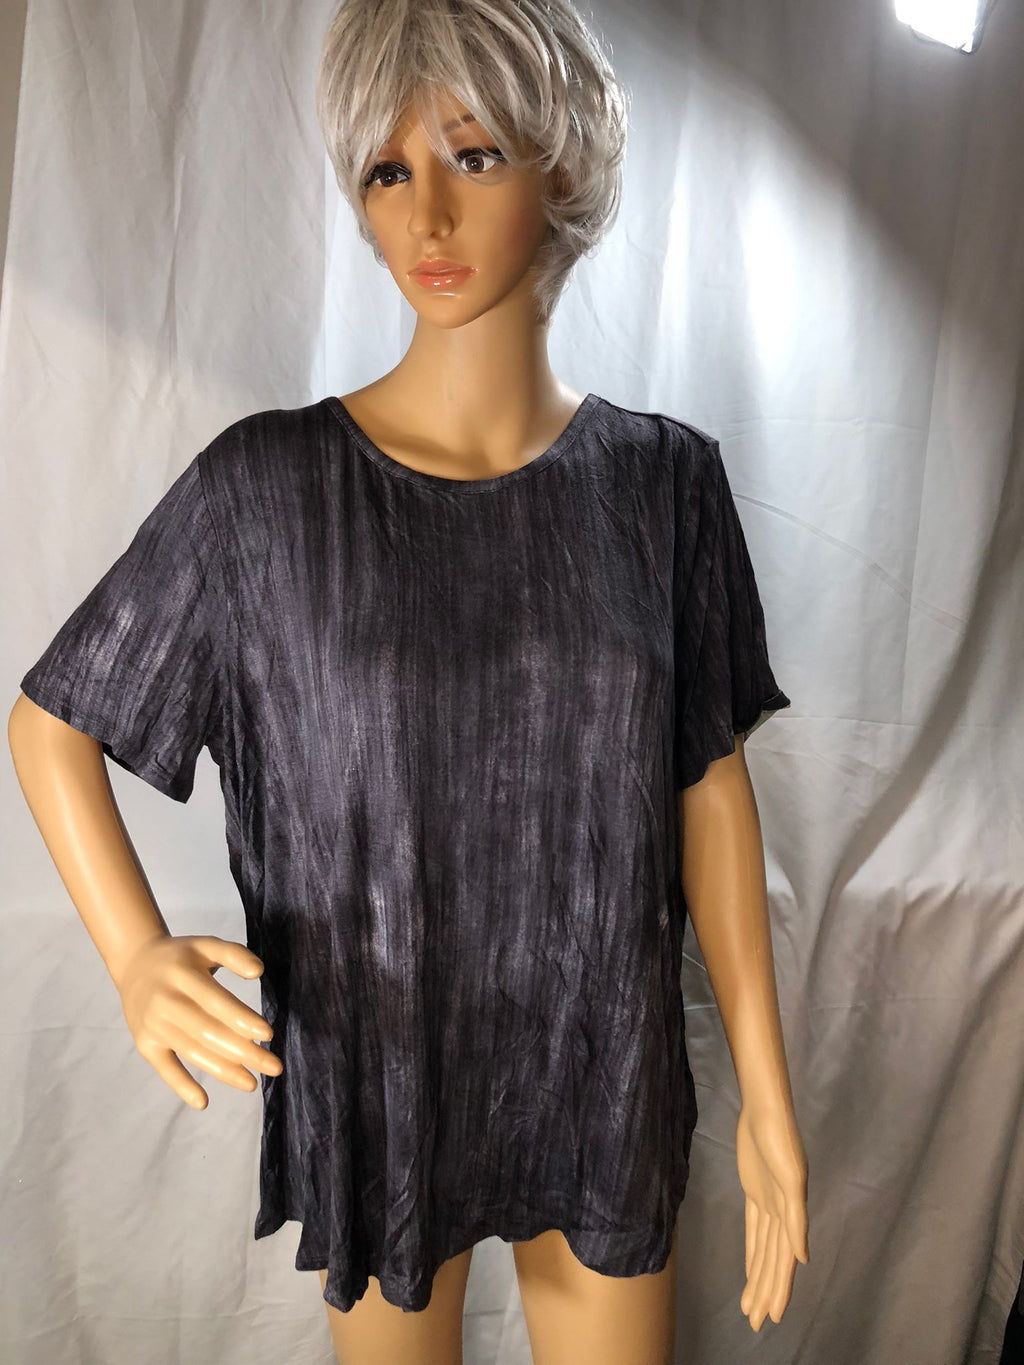 "As Is" Lisa Rinna Collection Knit Top w/ Back Detail